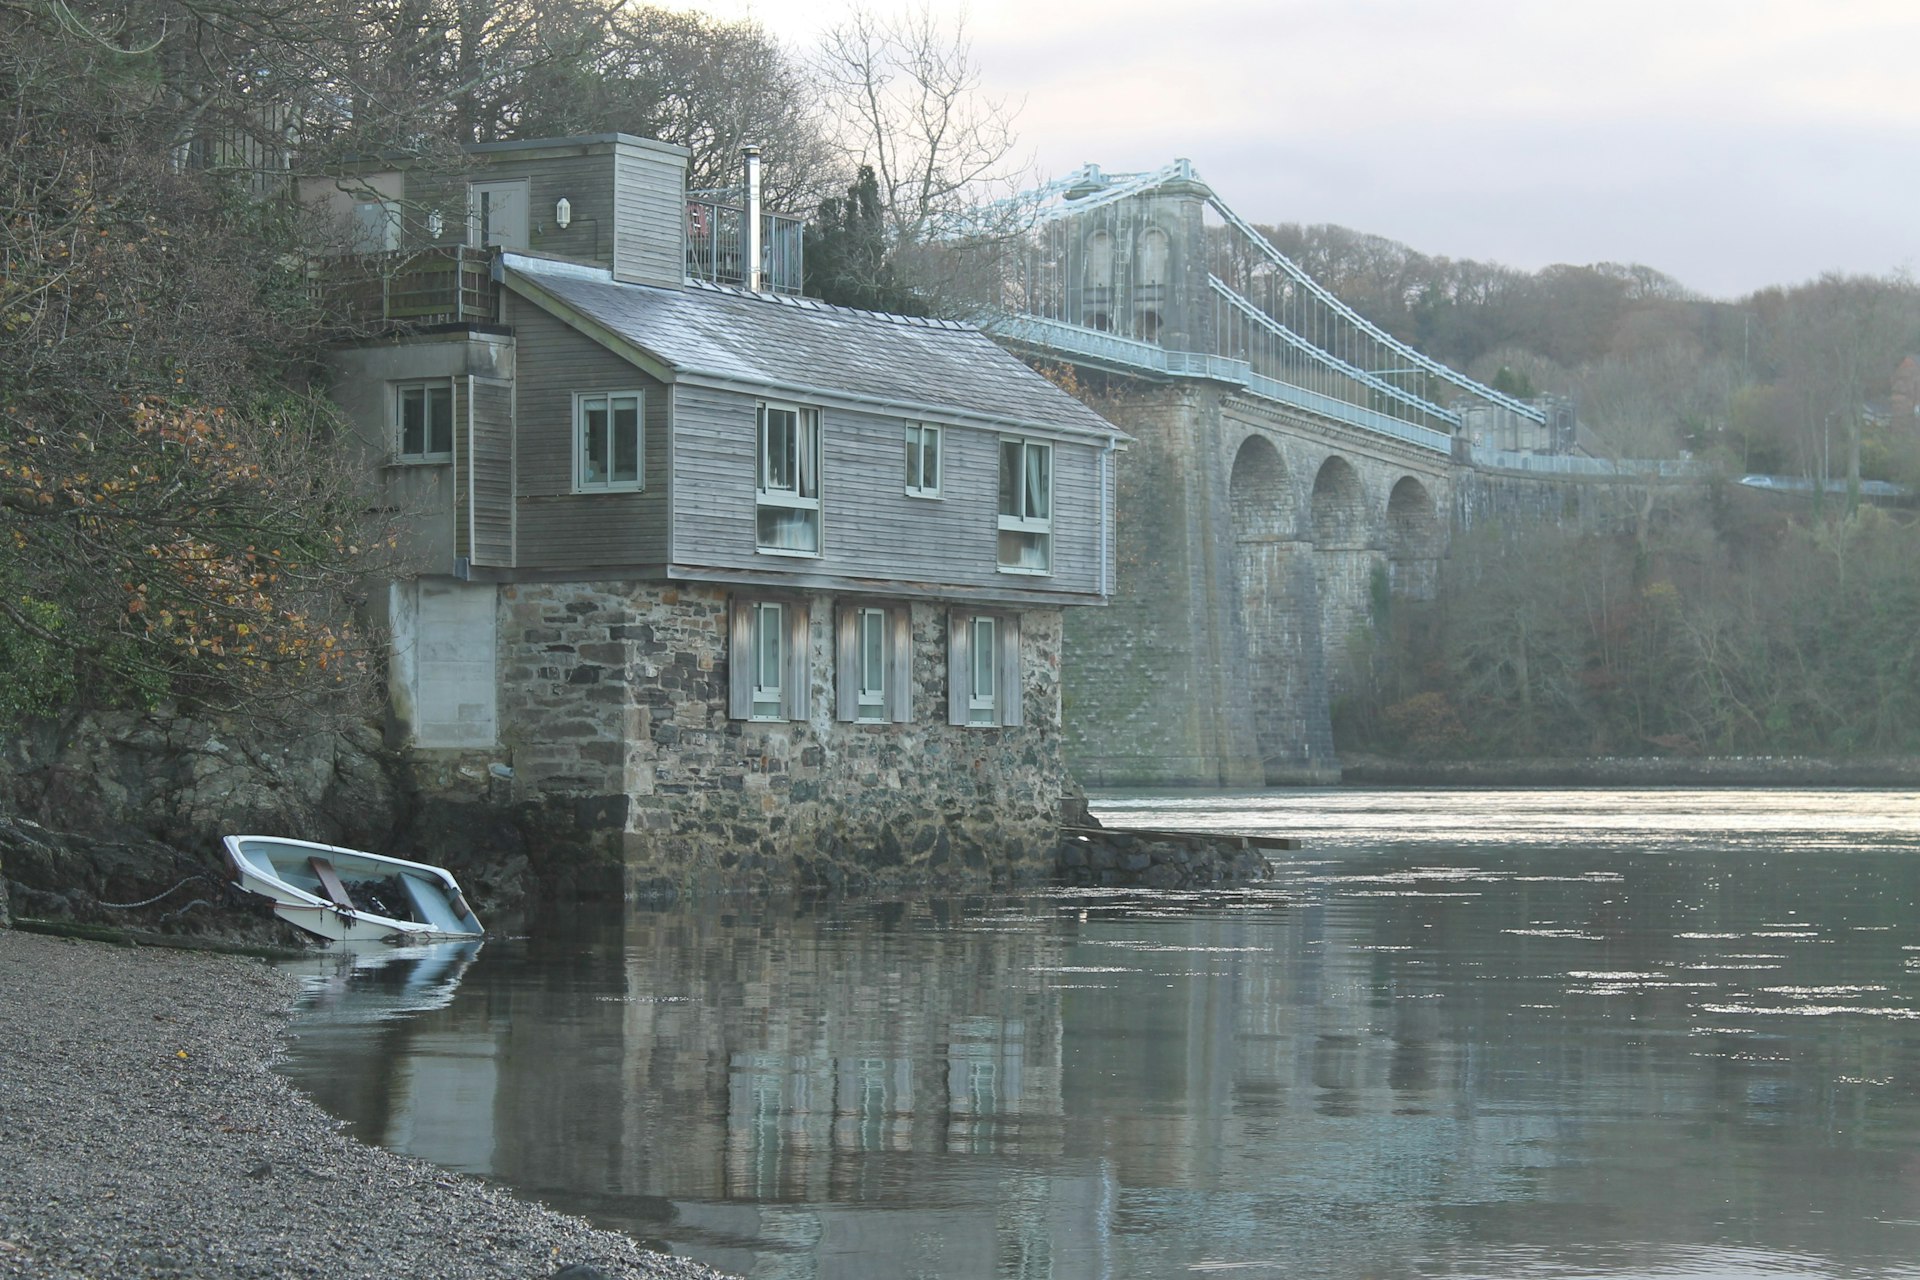 A boat house stands on the edge of the water at the end of a walkway in Anglesey. Behind it, a large bridge is visible.